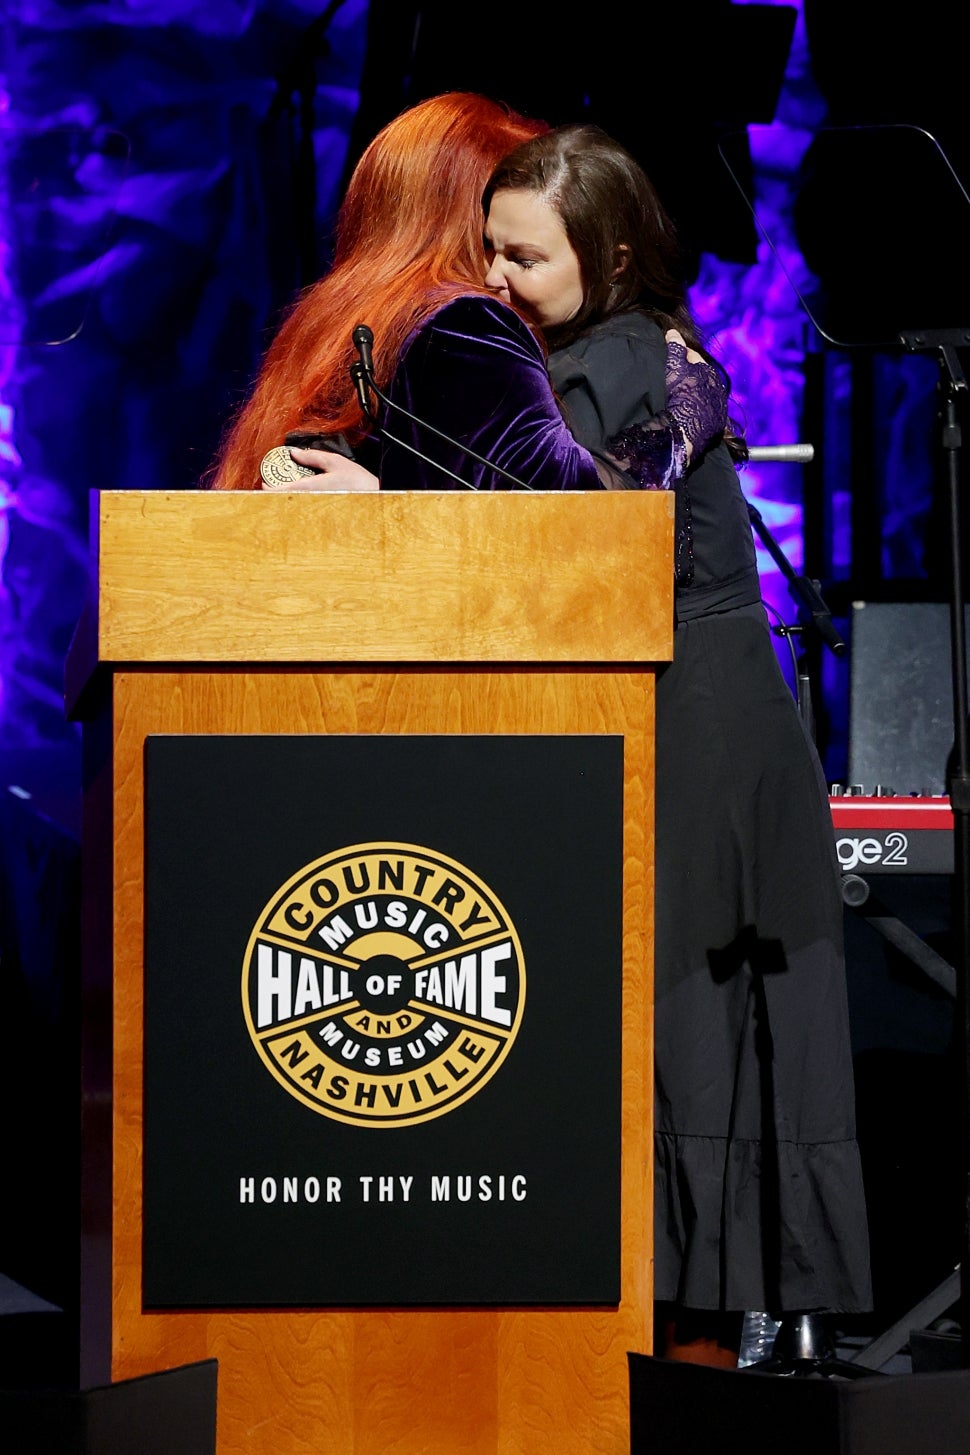 Inductee Wynonna Judd and Ashley Judd speak onstage for the class of 2021 medallion ceremony at Country Music Hall of Fame and Museum on May 01, 2022 in Nashville, Tennessee.